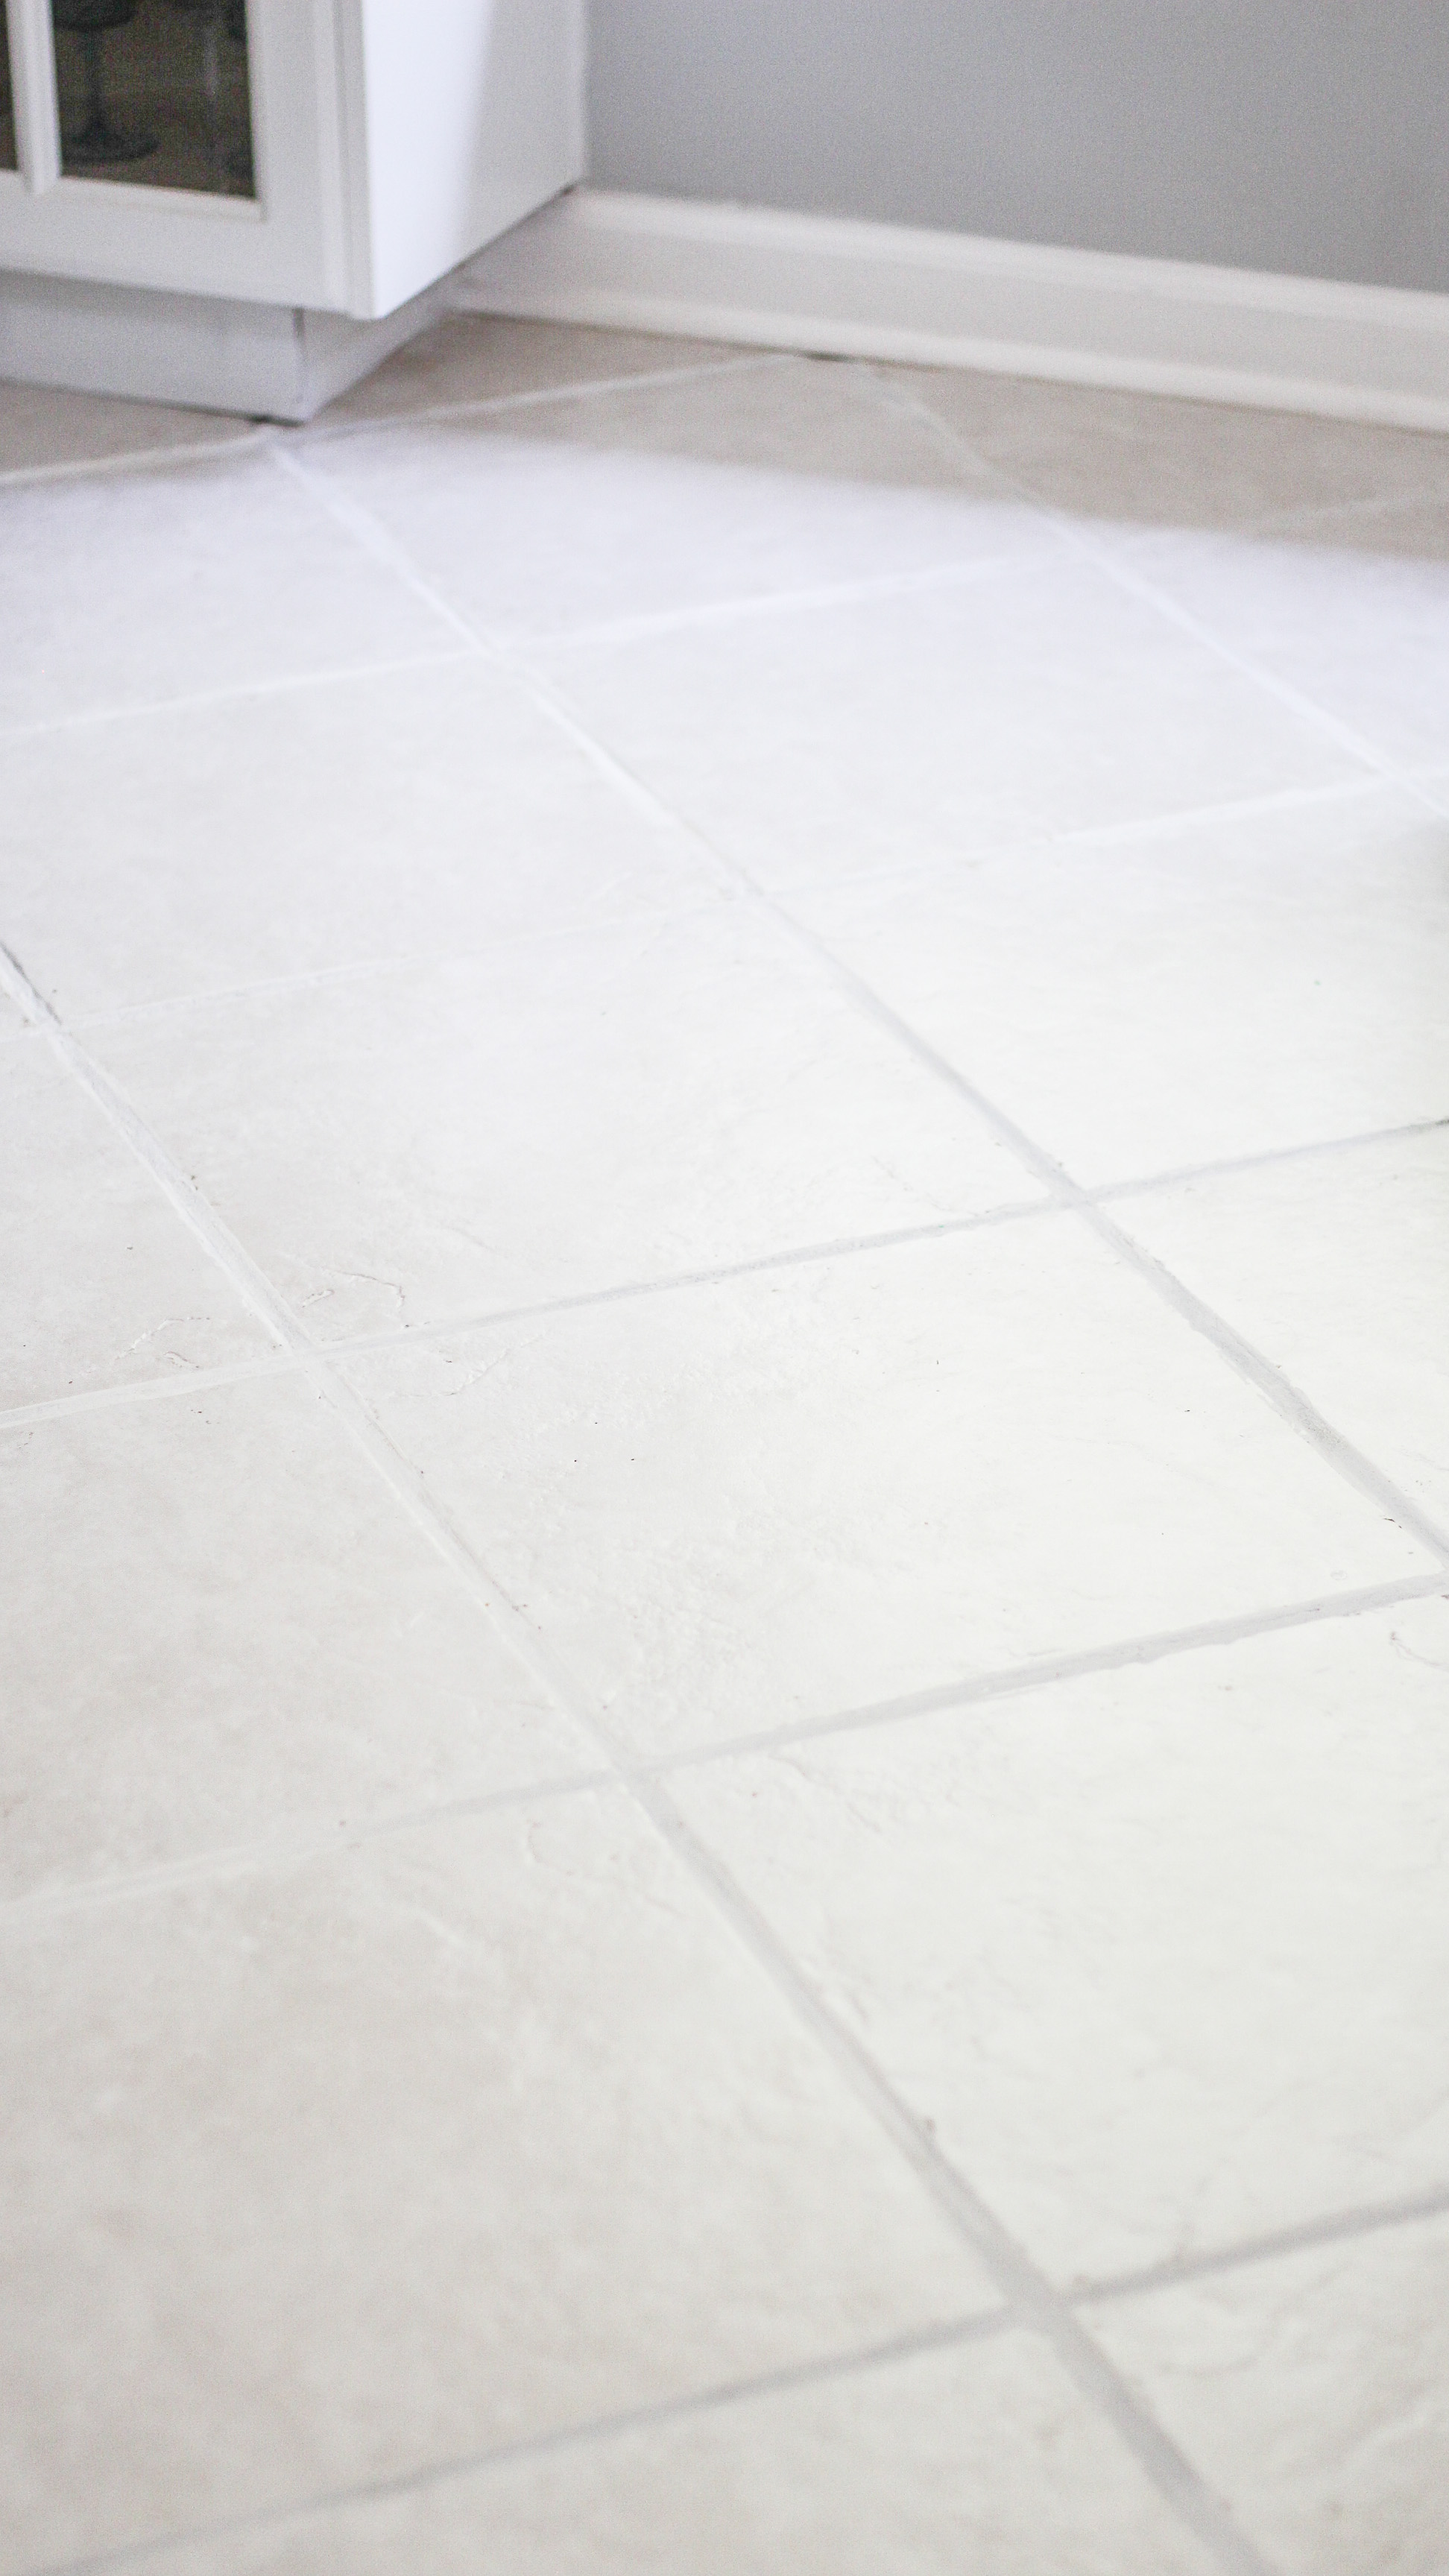 Neglected Tile Flooring, How To Clean Old Tile Floors